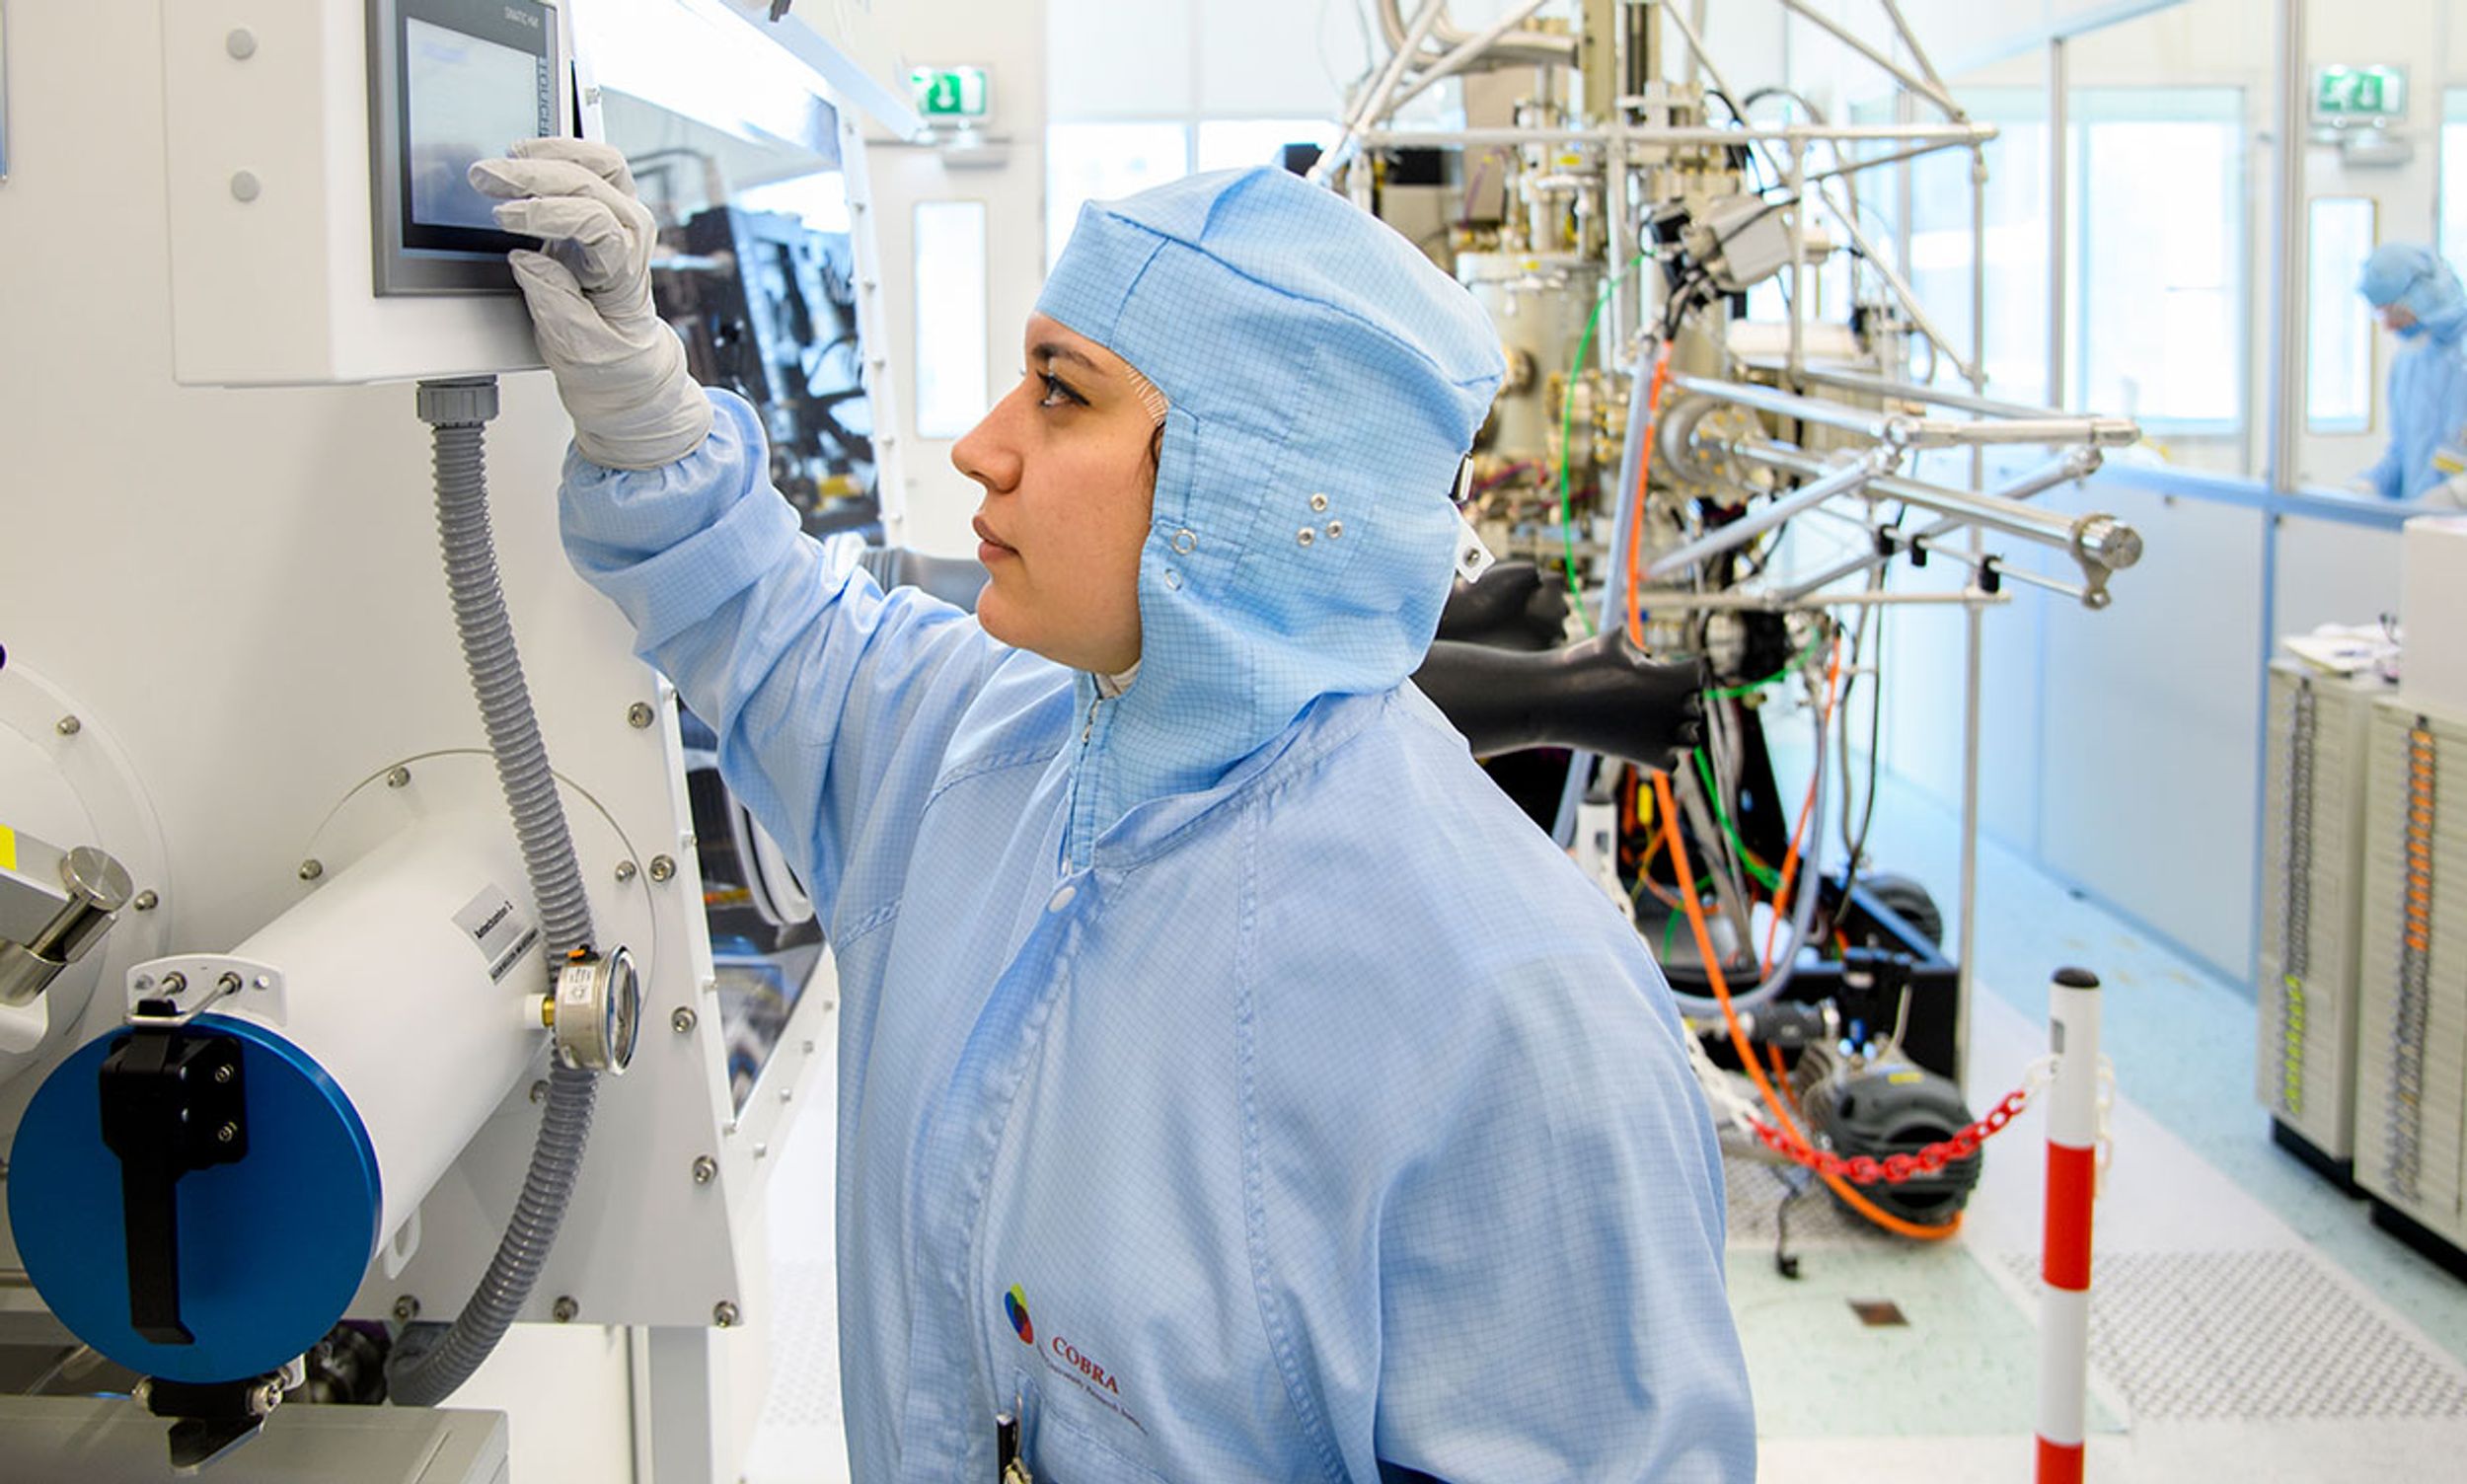 One of the authors, Elham Fadaly, is operating the Metal Organic Vapor Phase Epitaxy (MOVPE). This machine grows the nanowires with hexagonal silicon-germanium shells.